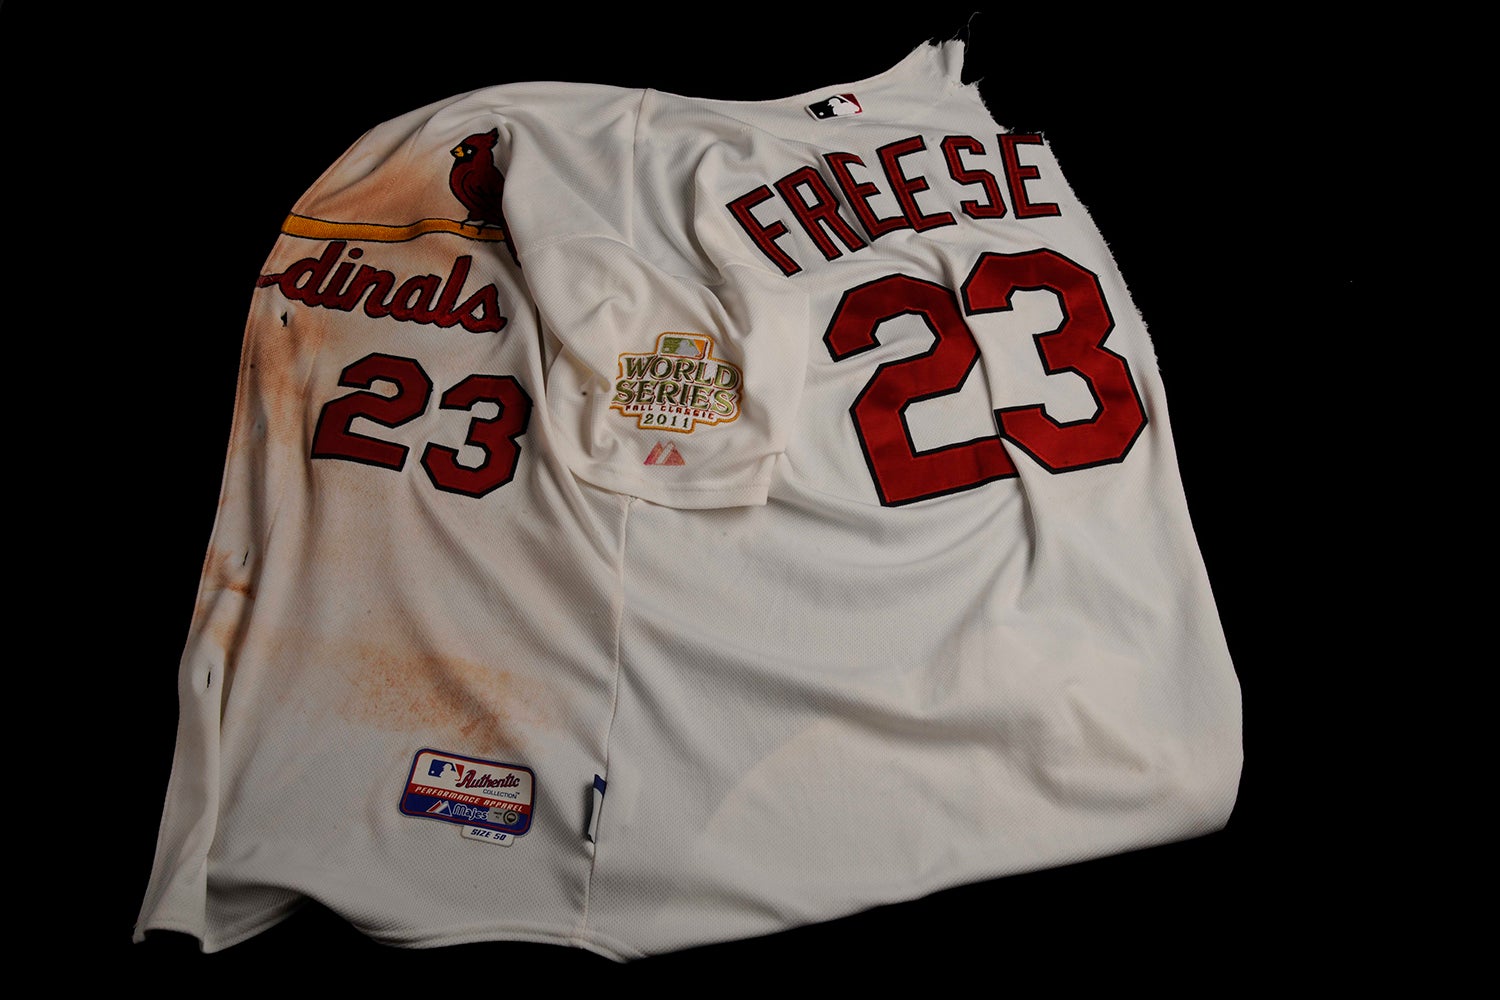 A Freese in October: David Freese’s Game 6 Jersey Among Artifacts on Hall of Fame Tour 